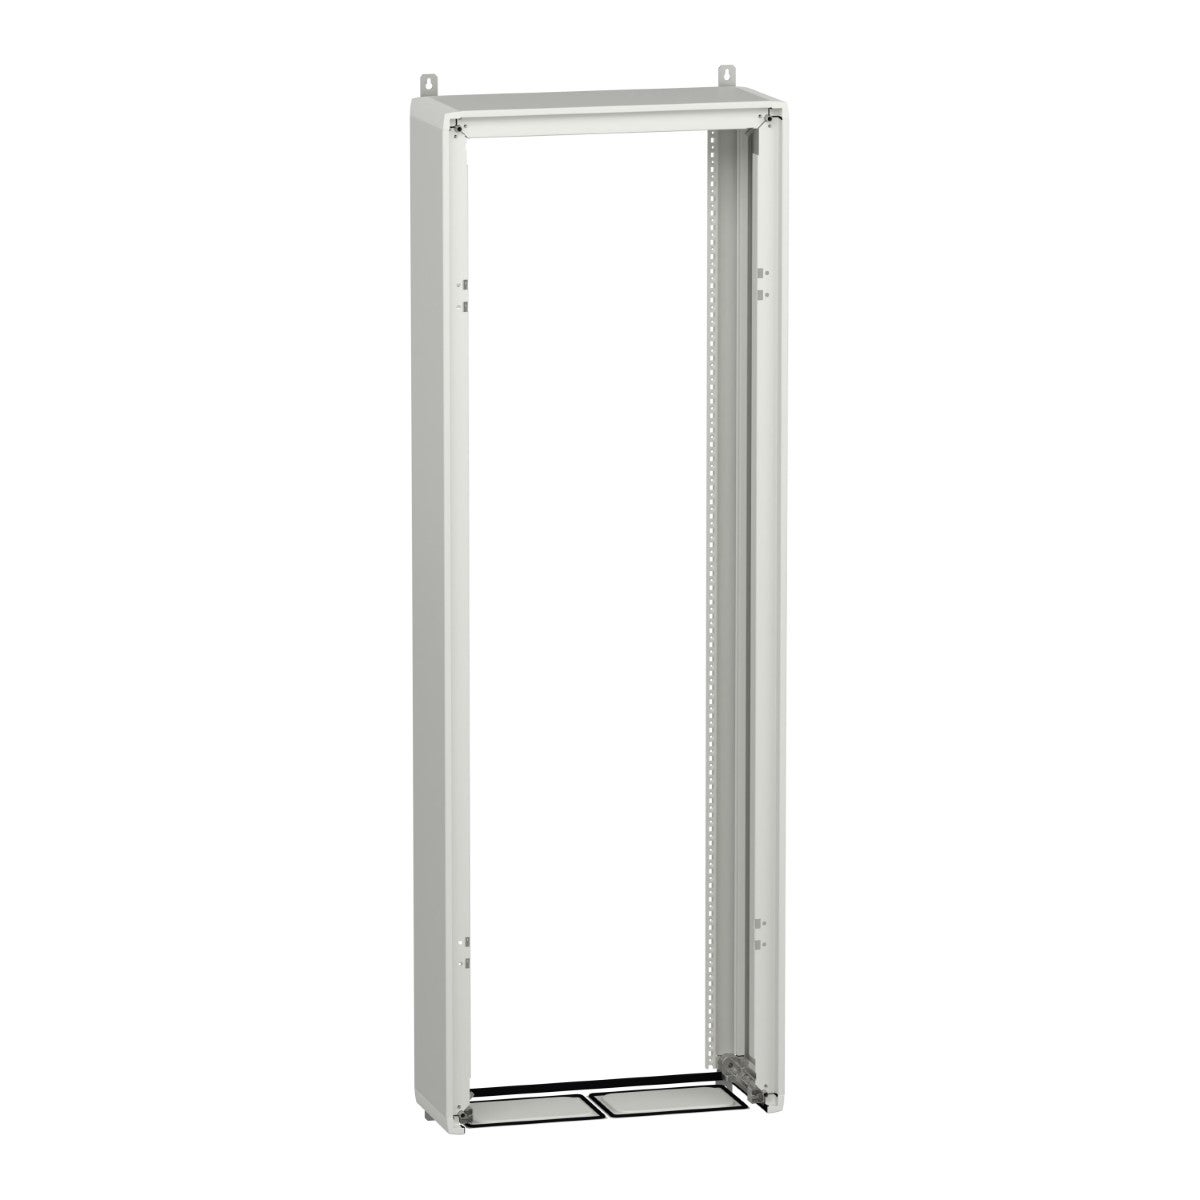 Enclosure, PrismaSeT G, wall mounted/floor standing, without plinth, 33M, W600mm, H1750mm, IP55